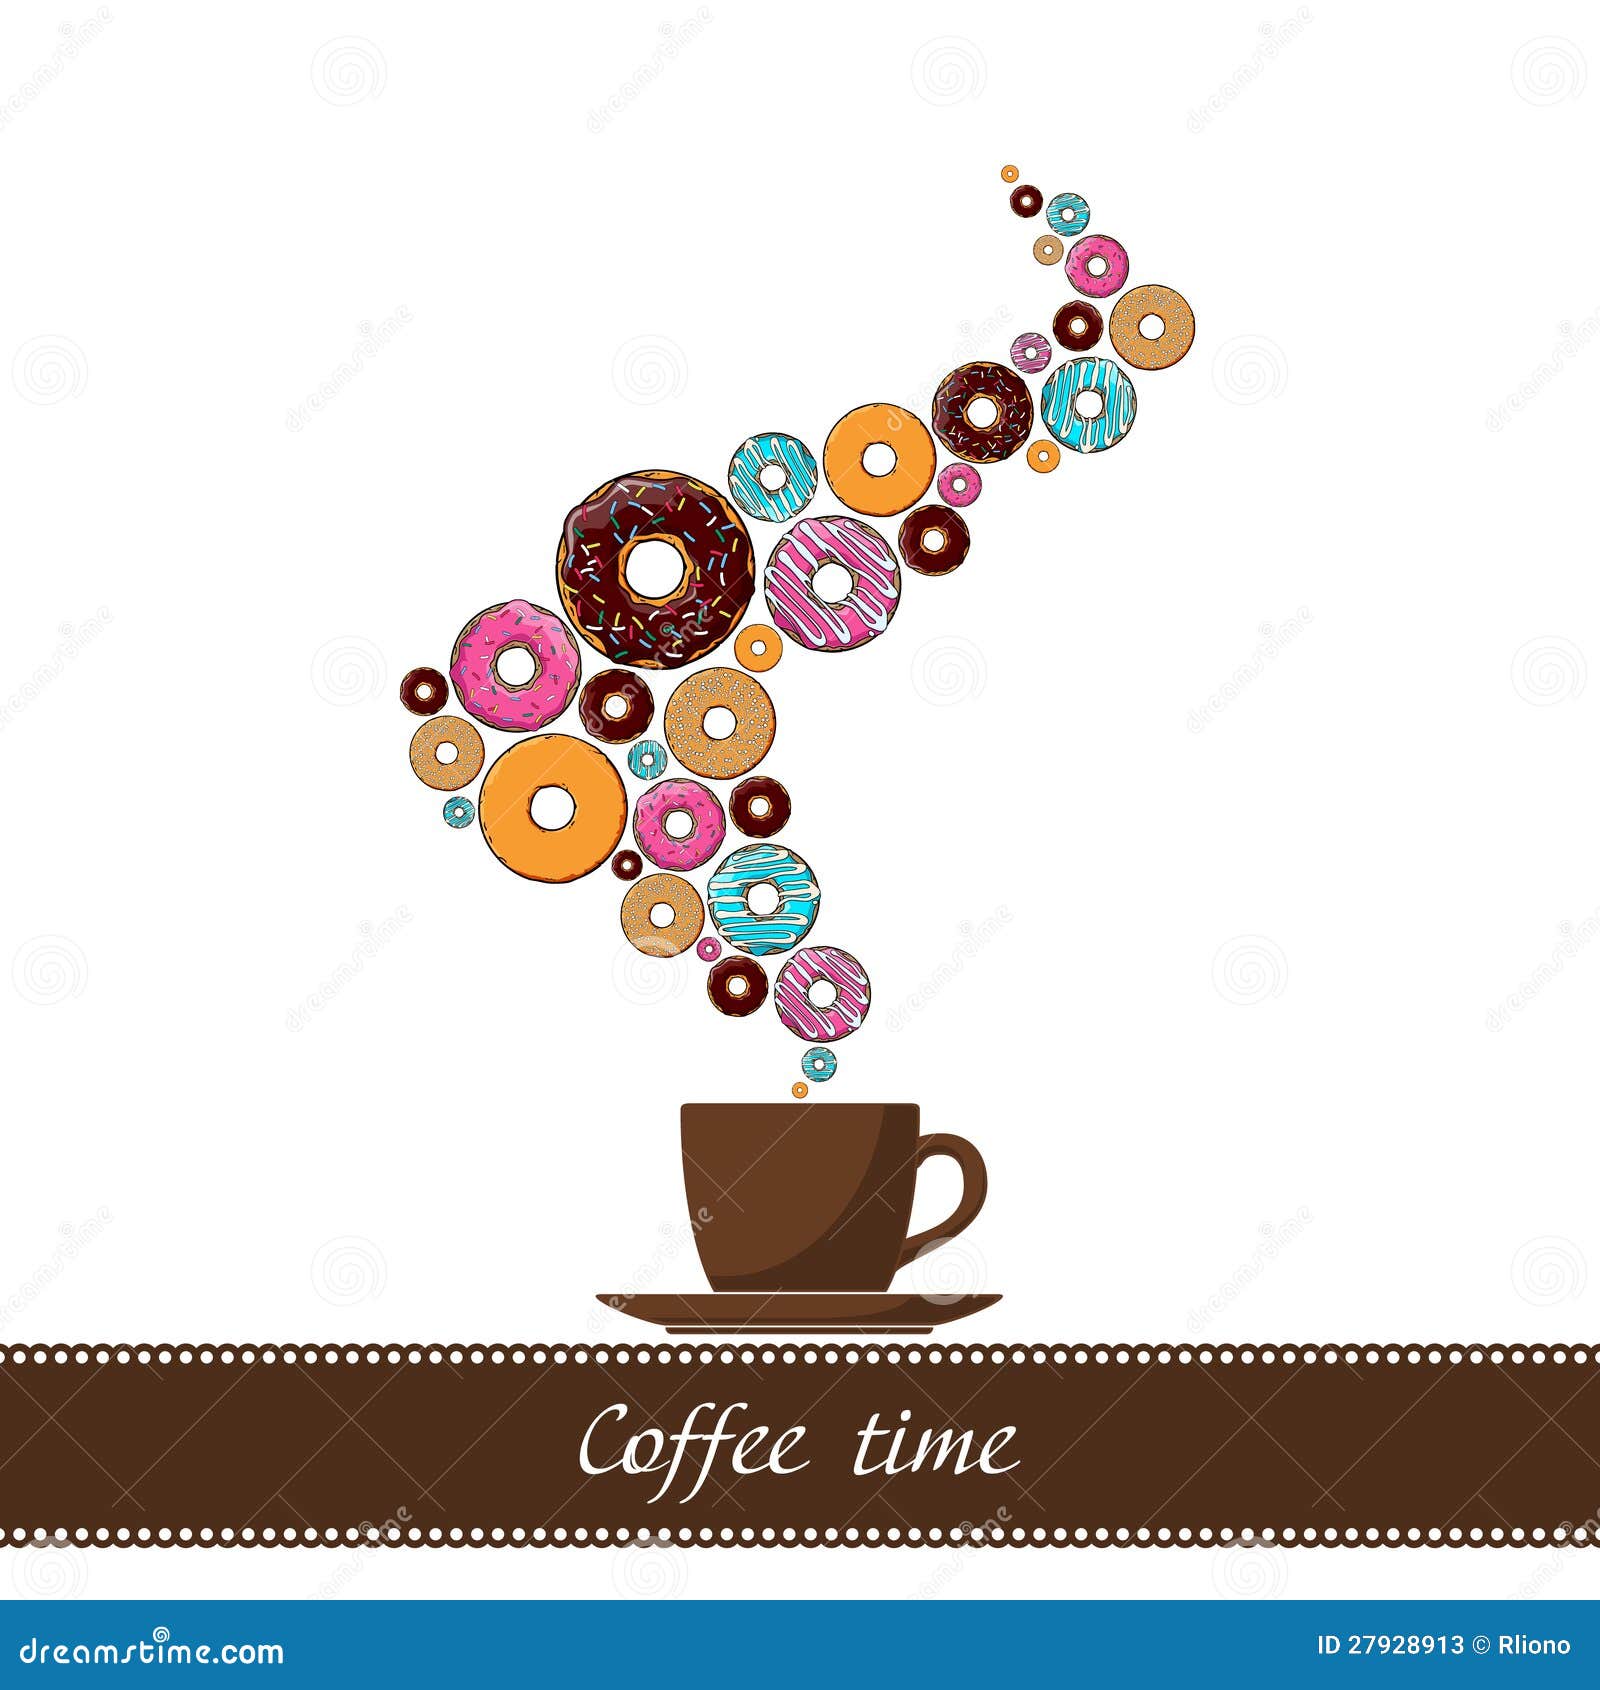 https://thumbs.dreamstime.com/z/abstract-illustration-coffee-cup-donut-27928913.jpg